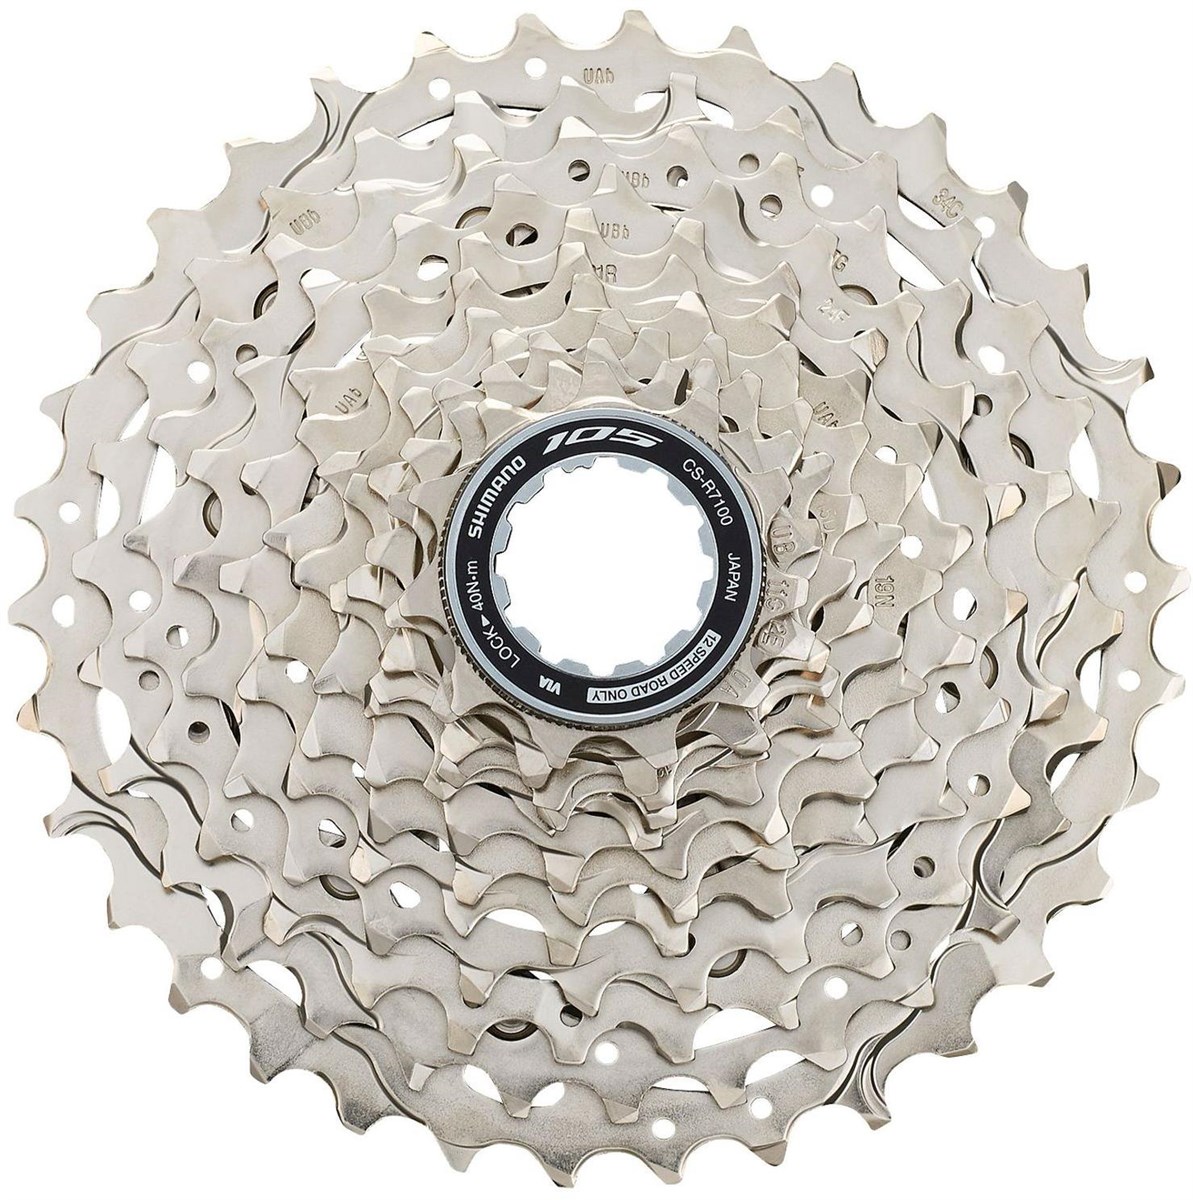 Shimano CS-R7100 105 12-speed Cassette product image